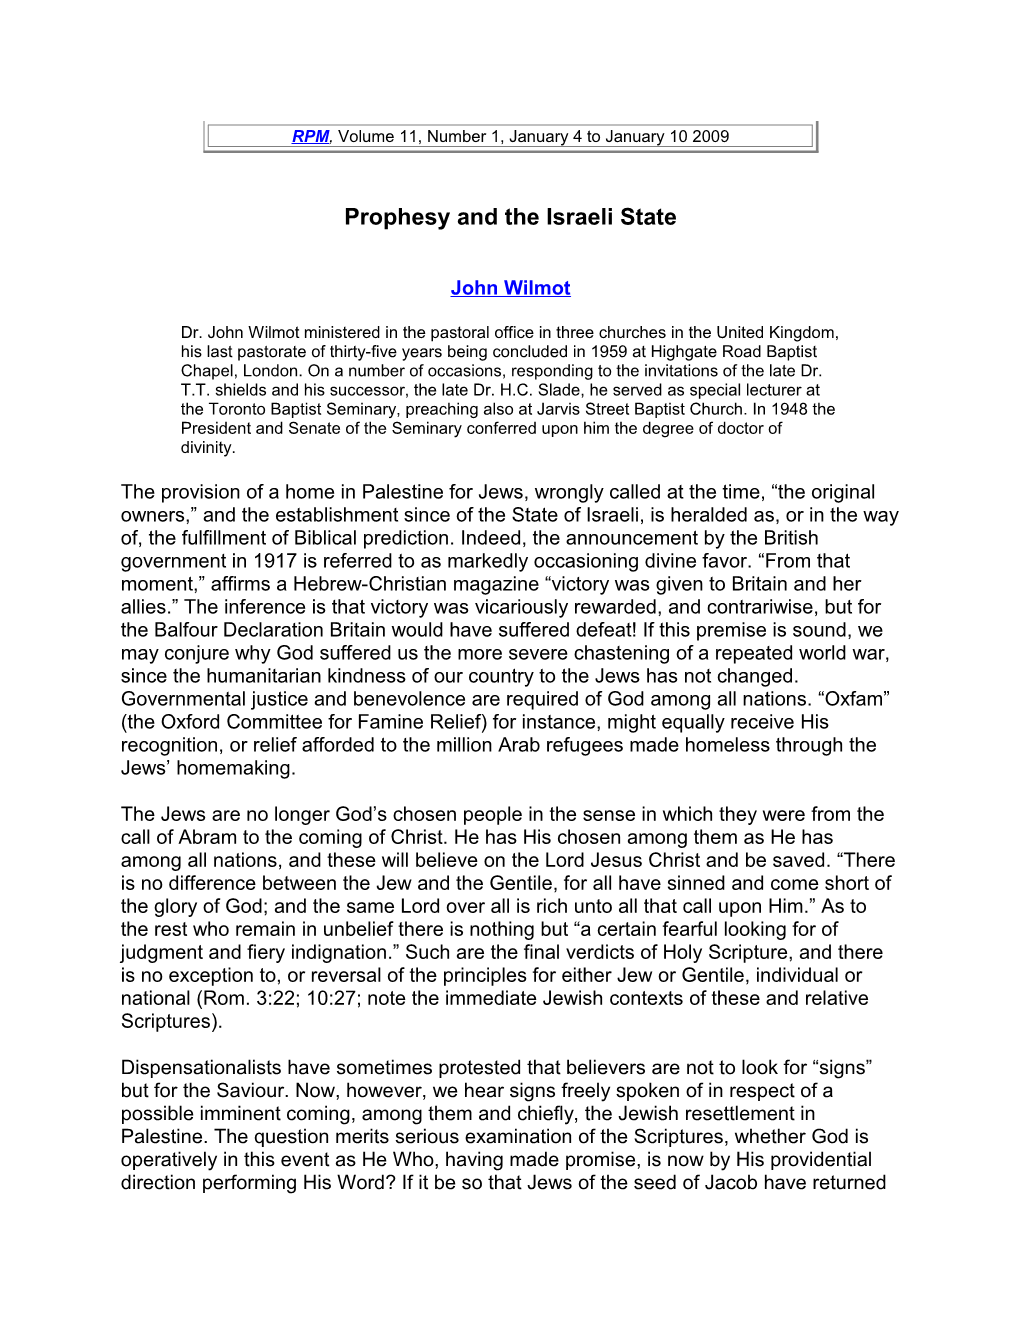 Prophesy and the Israeli State